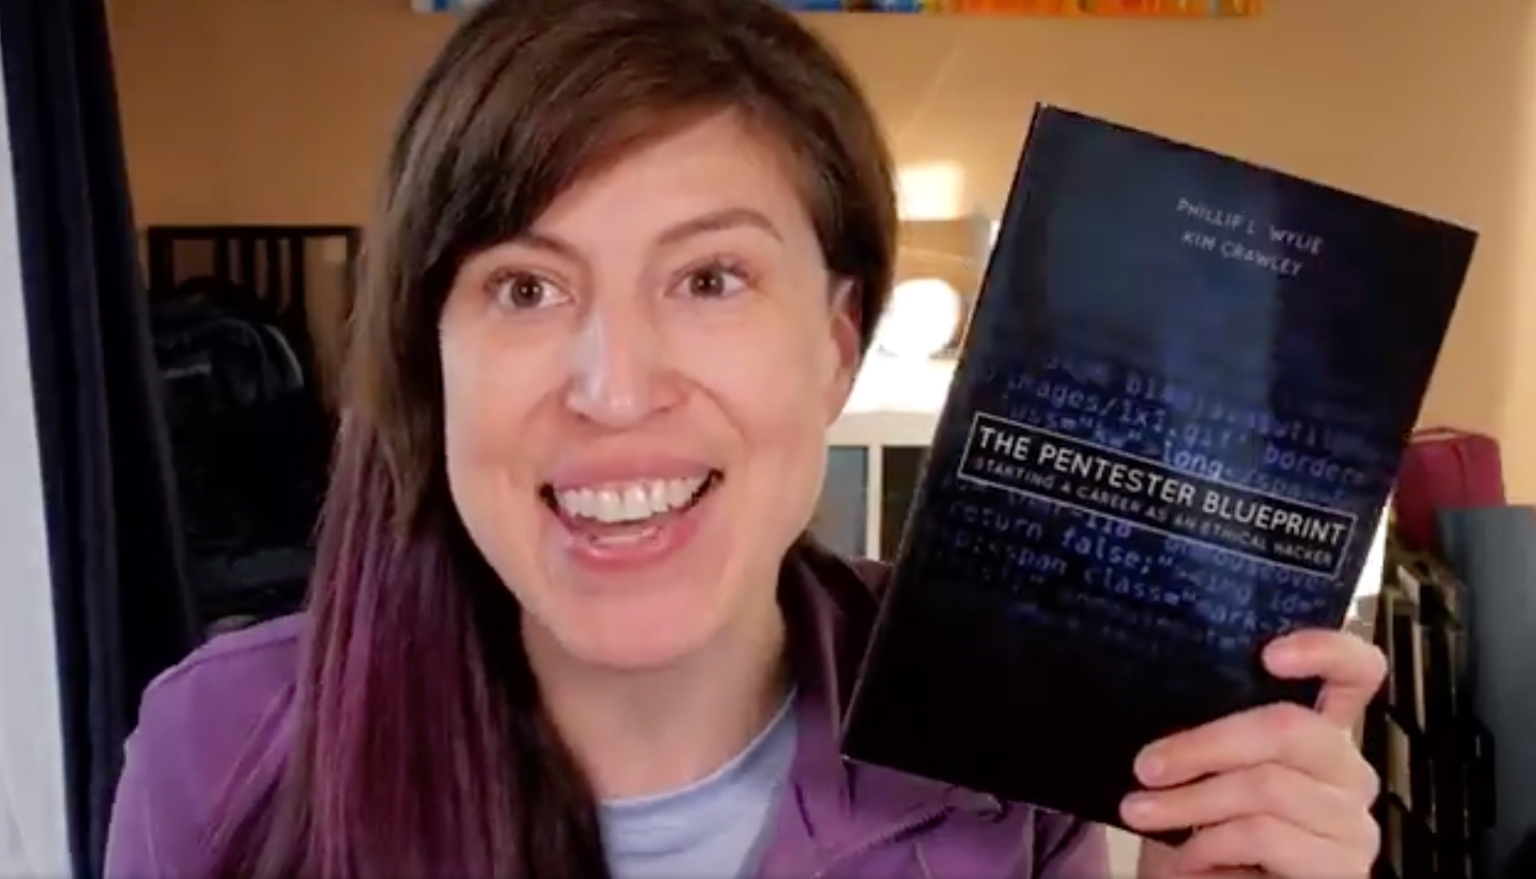 Kim's book in the hands of a fellow infosec sec pro